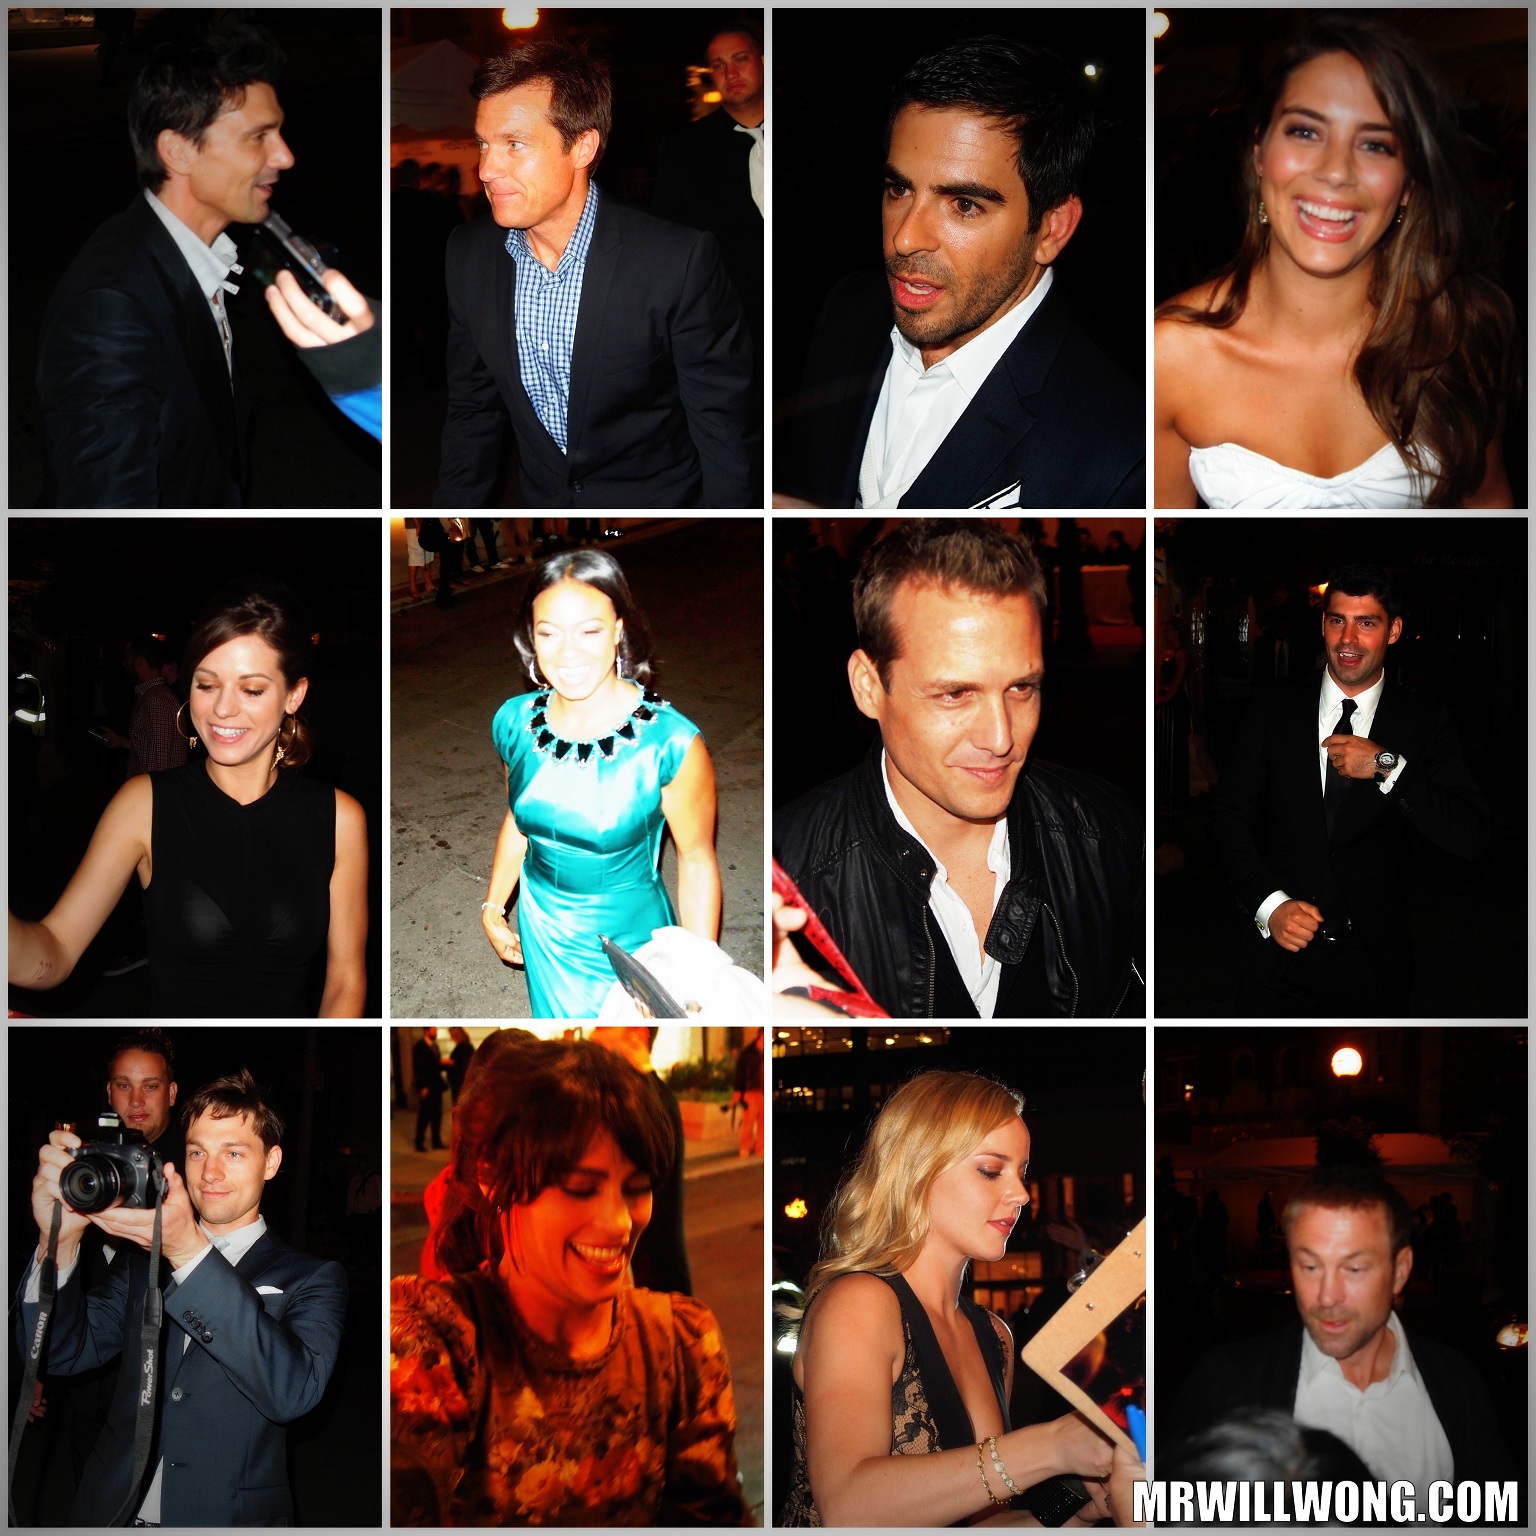 #TIFF12: INSTYLE MAGAZINE PARTY CELEBRITY ARRIVALS